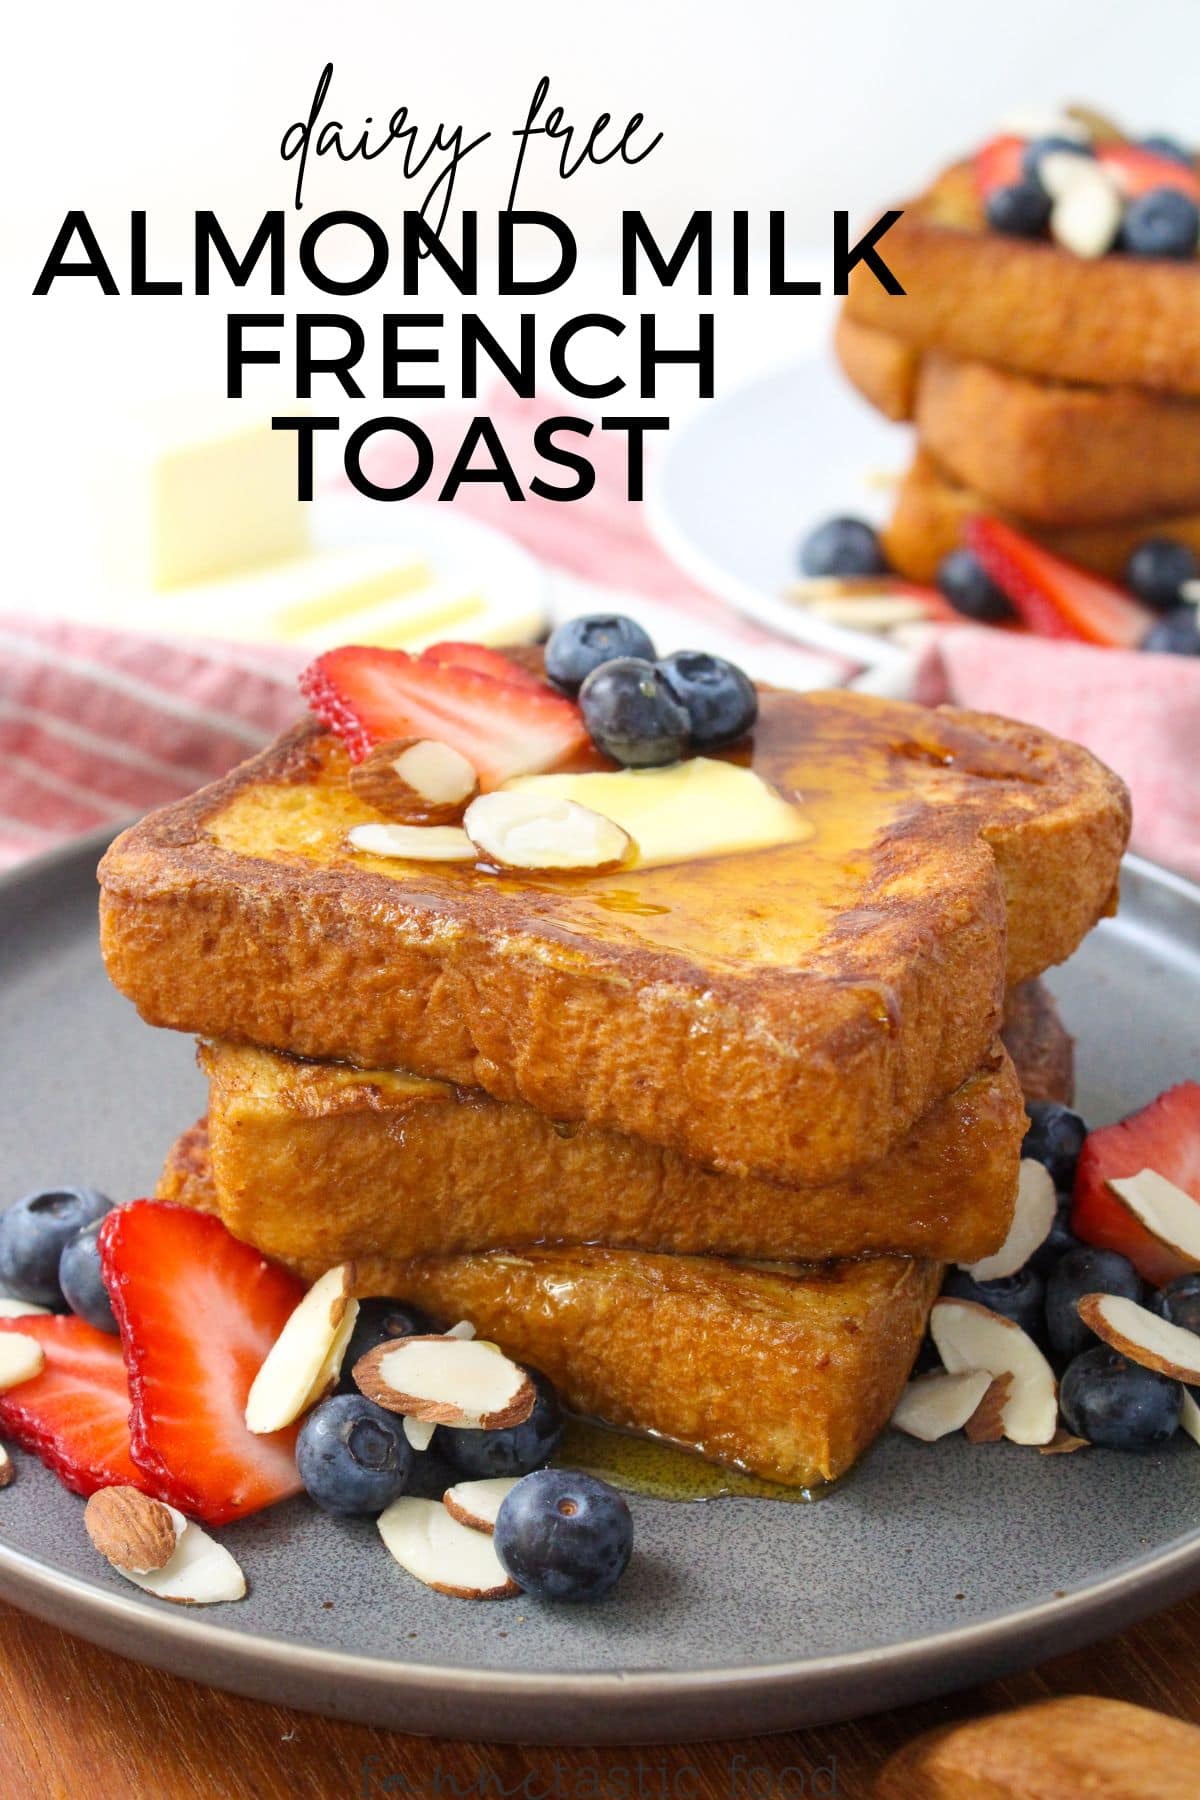 stack of almond milk french toast with berries